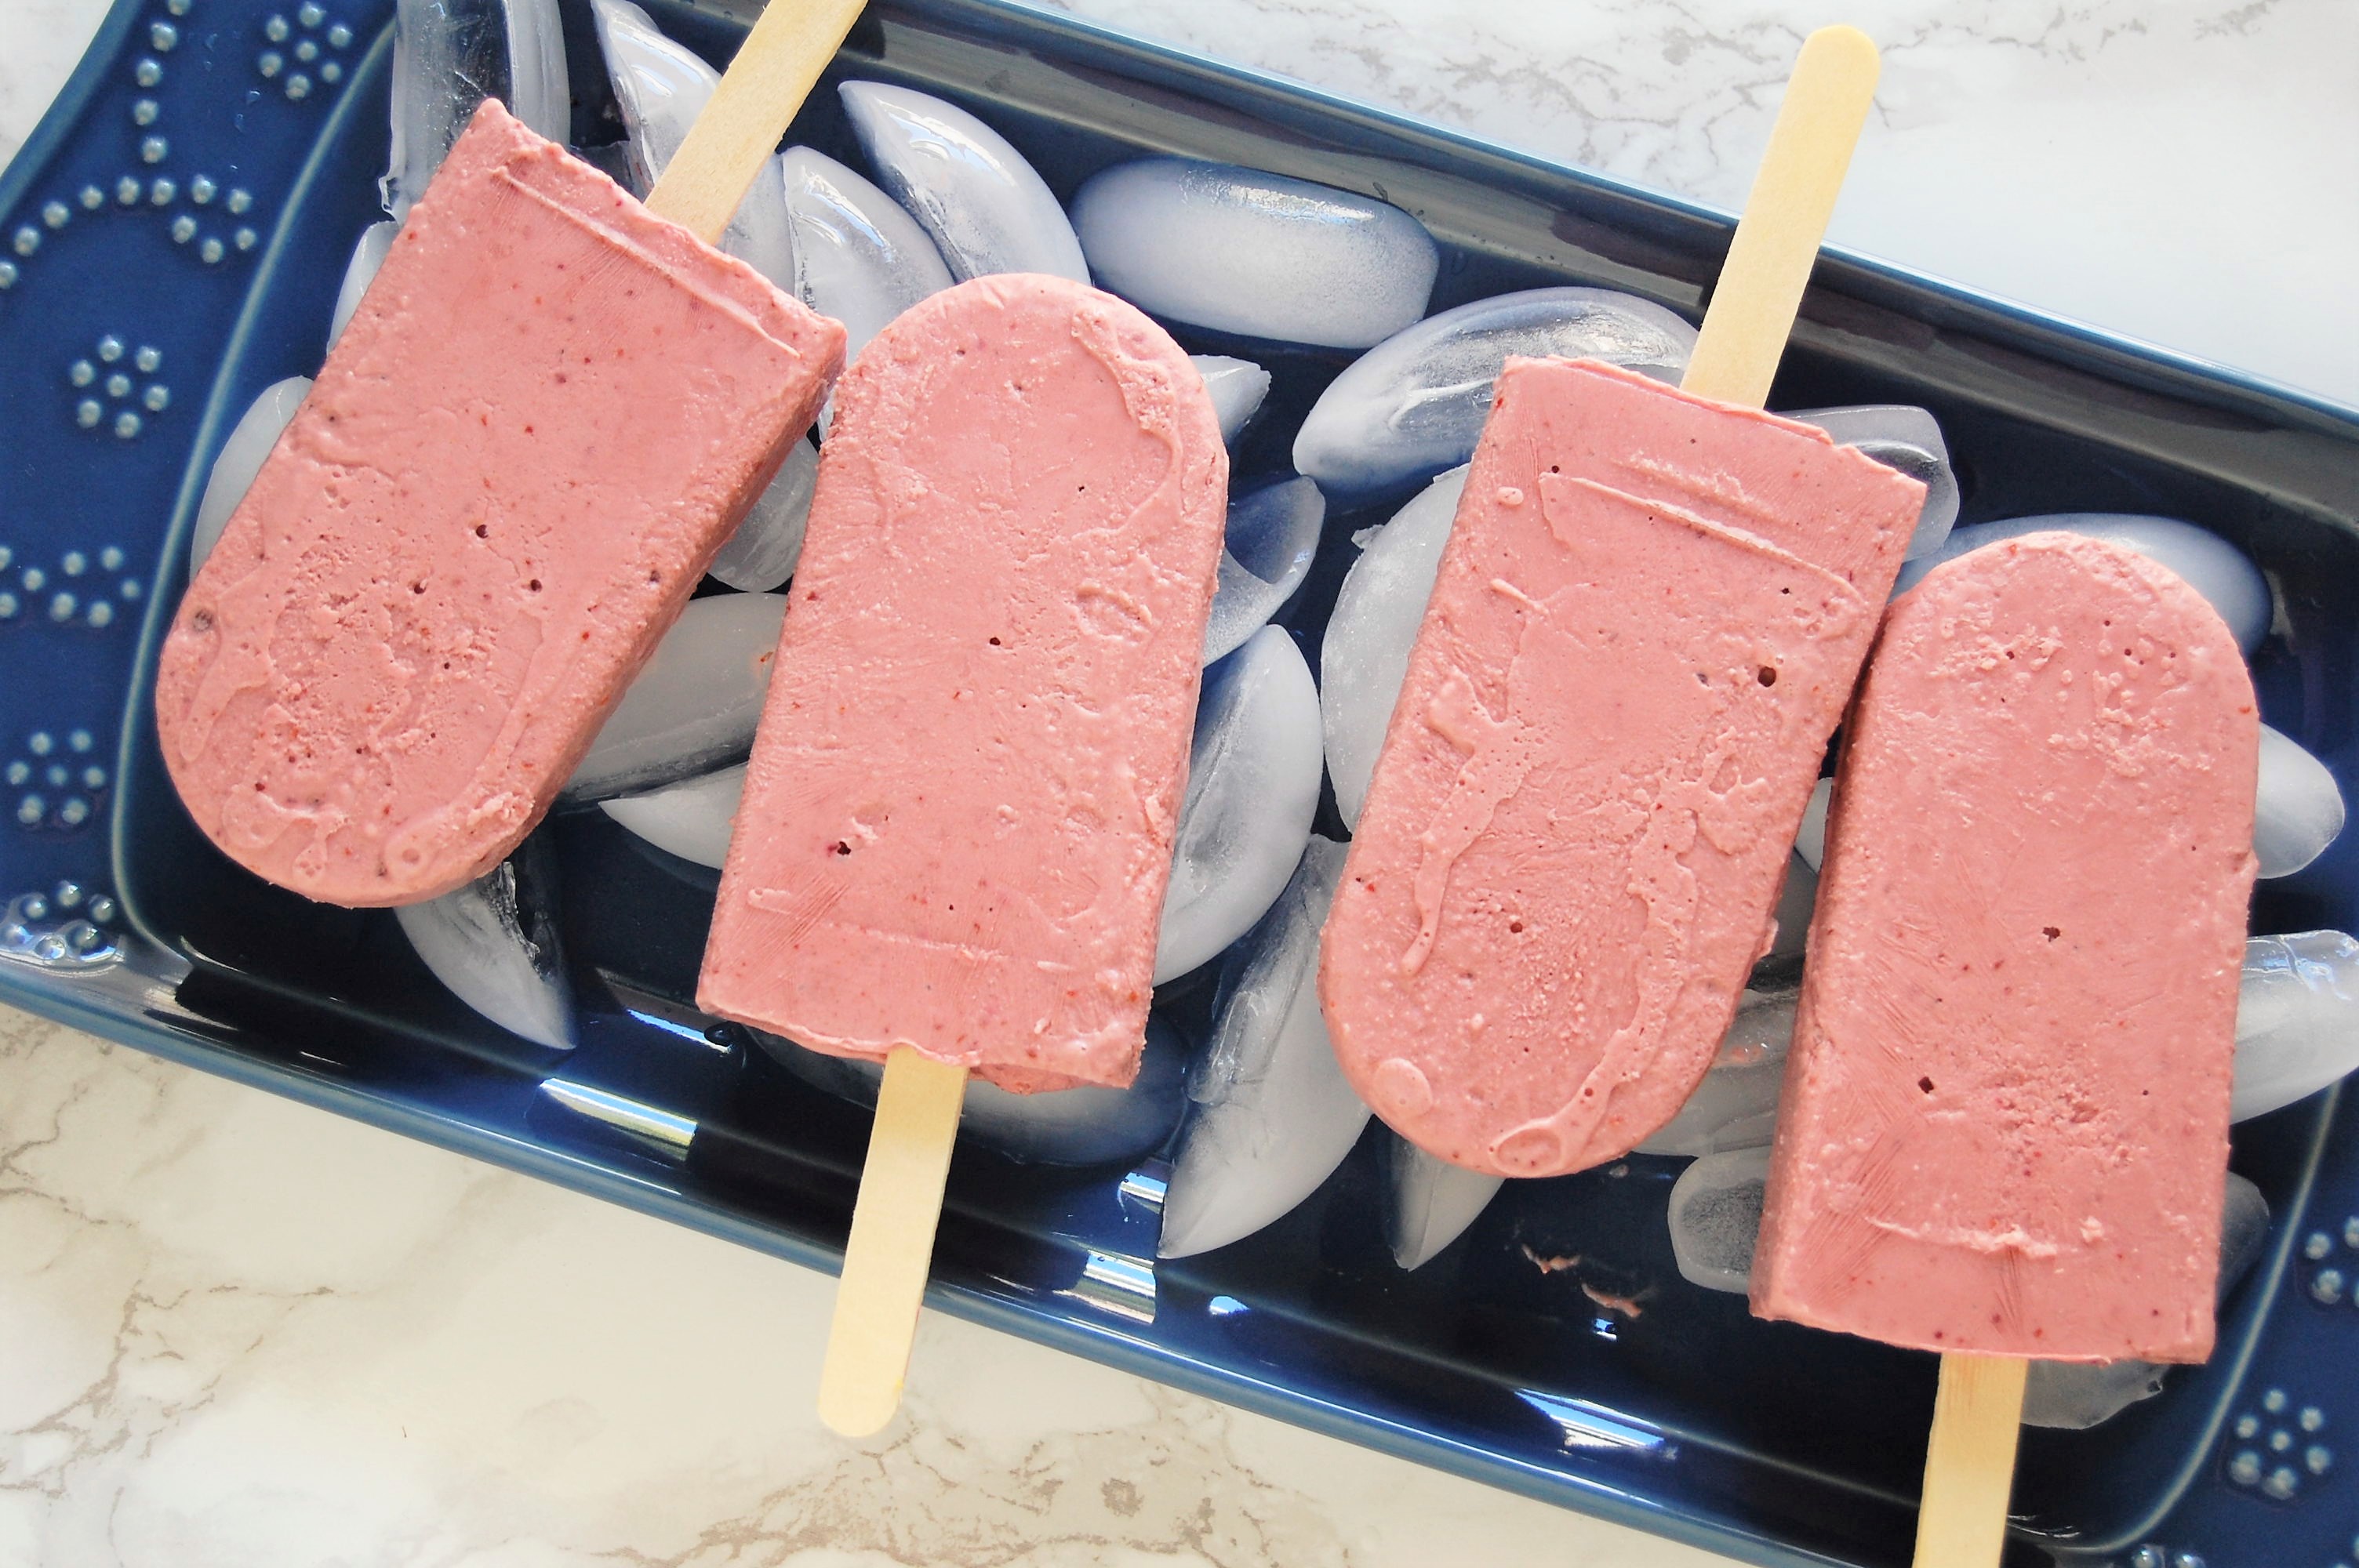 Cherry Cheesecake Protein Pops are a healthy treat recipe, easy to make with just four ingredients! This is a refreshing treat packed with fruit and protein, perfect for the whole family this summertime! | recipe, healthy recipe, healthy dessert, protein dessert, easy recipe, cherries, cheesecake, popsicle, nutrition, dietitian |